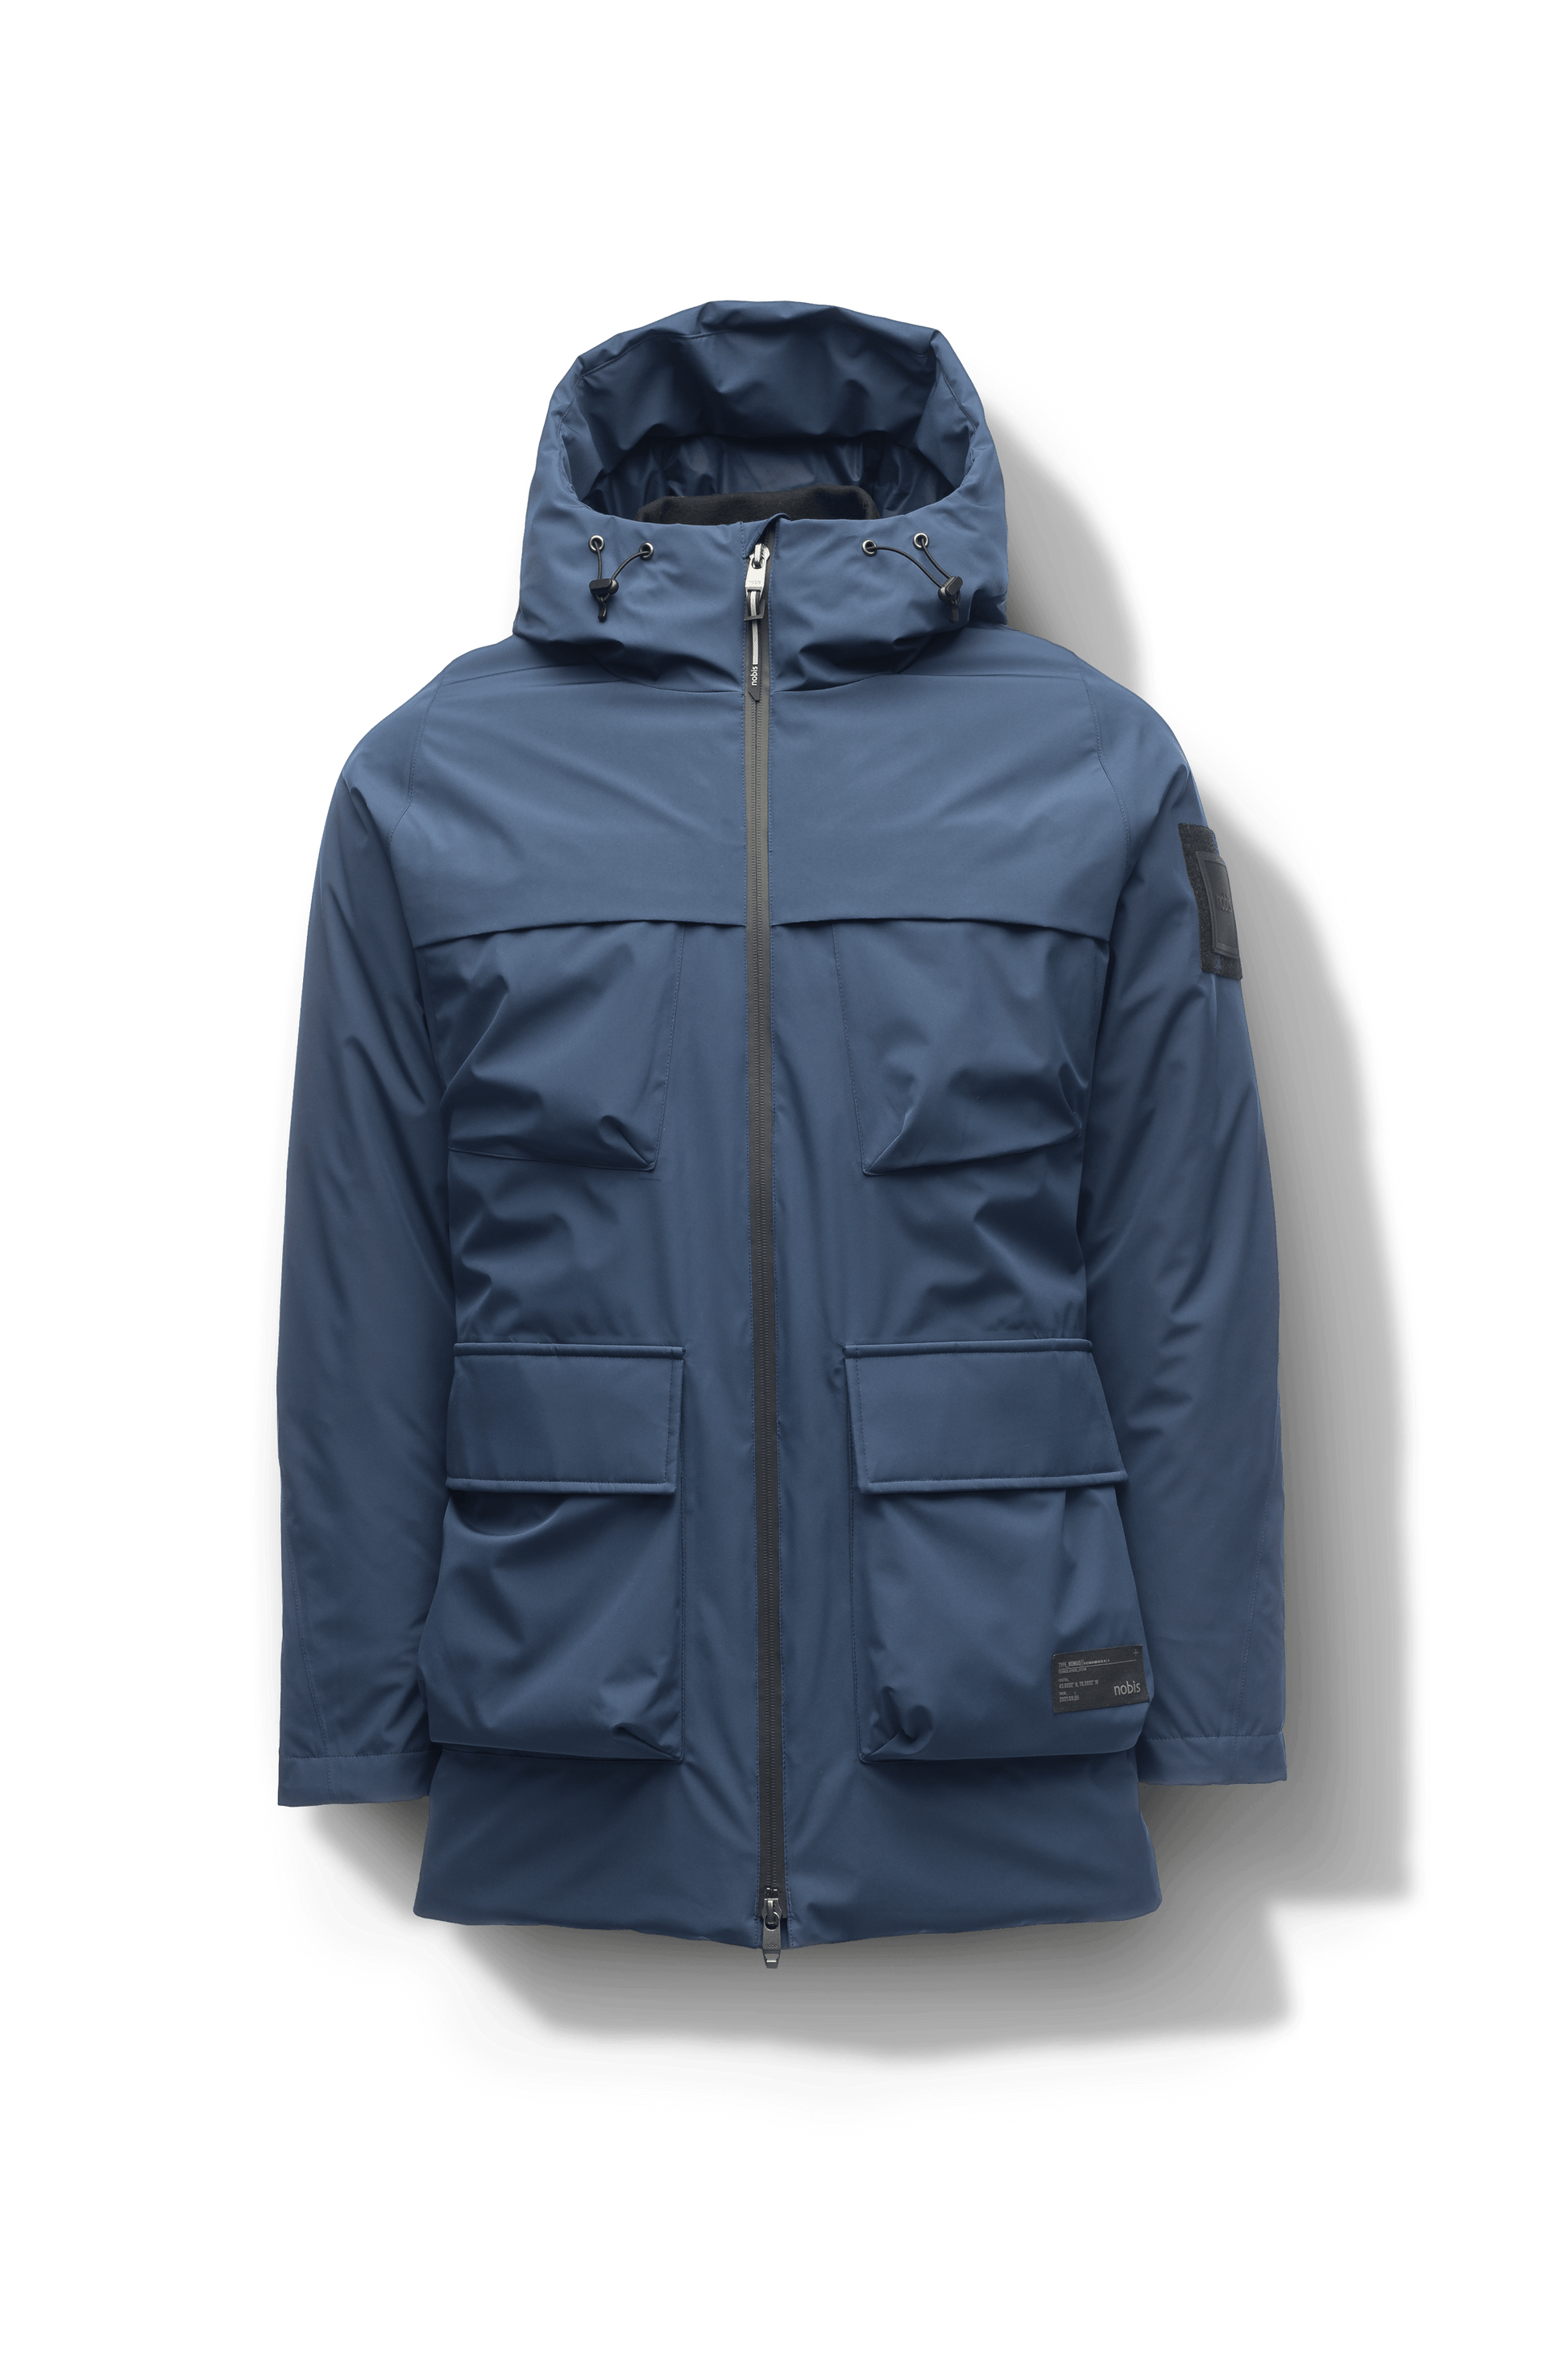 Ronin Men's Performance Utility Jacket in thigh length, premium 3-ply micro denier and stretch ripstop fabrication, Premium Canadian origin White Duck Down insulation, non-removable down-filled hood, bellow chest pockets, magnetic closure waist flap pockets, two-way centre-front zipper, pit zipper vents, hidden adjustable waist drawcord, in Marine